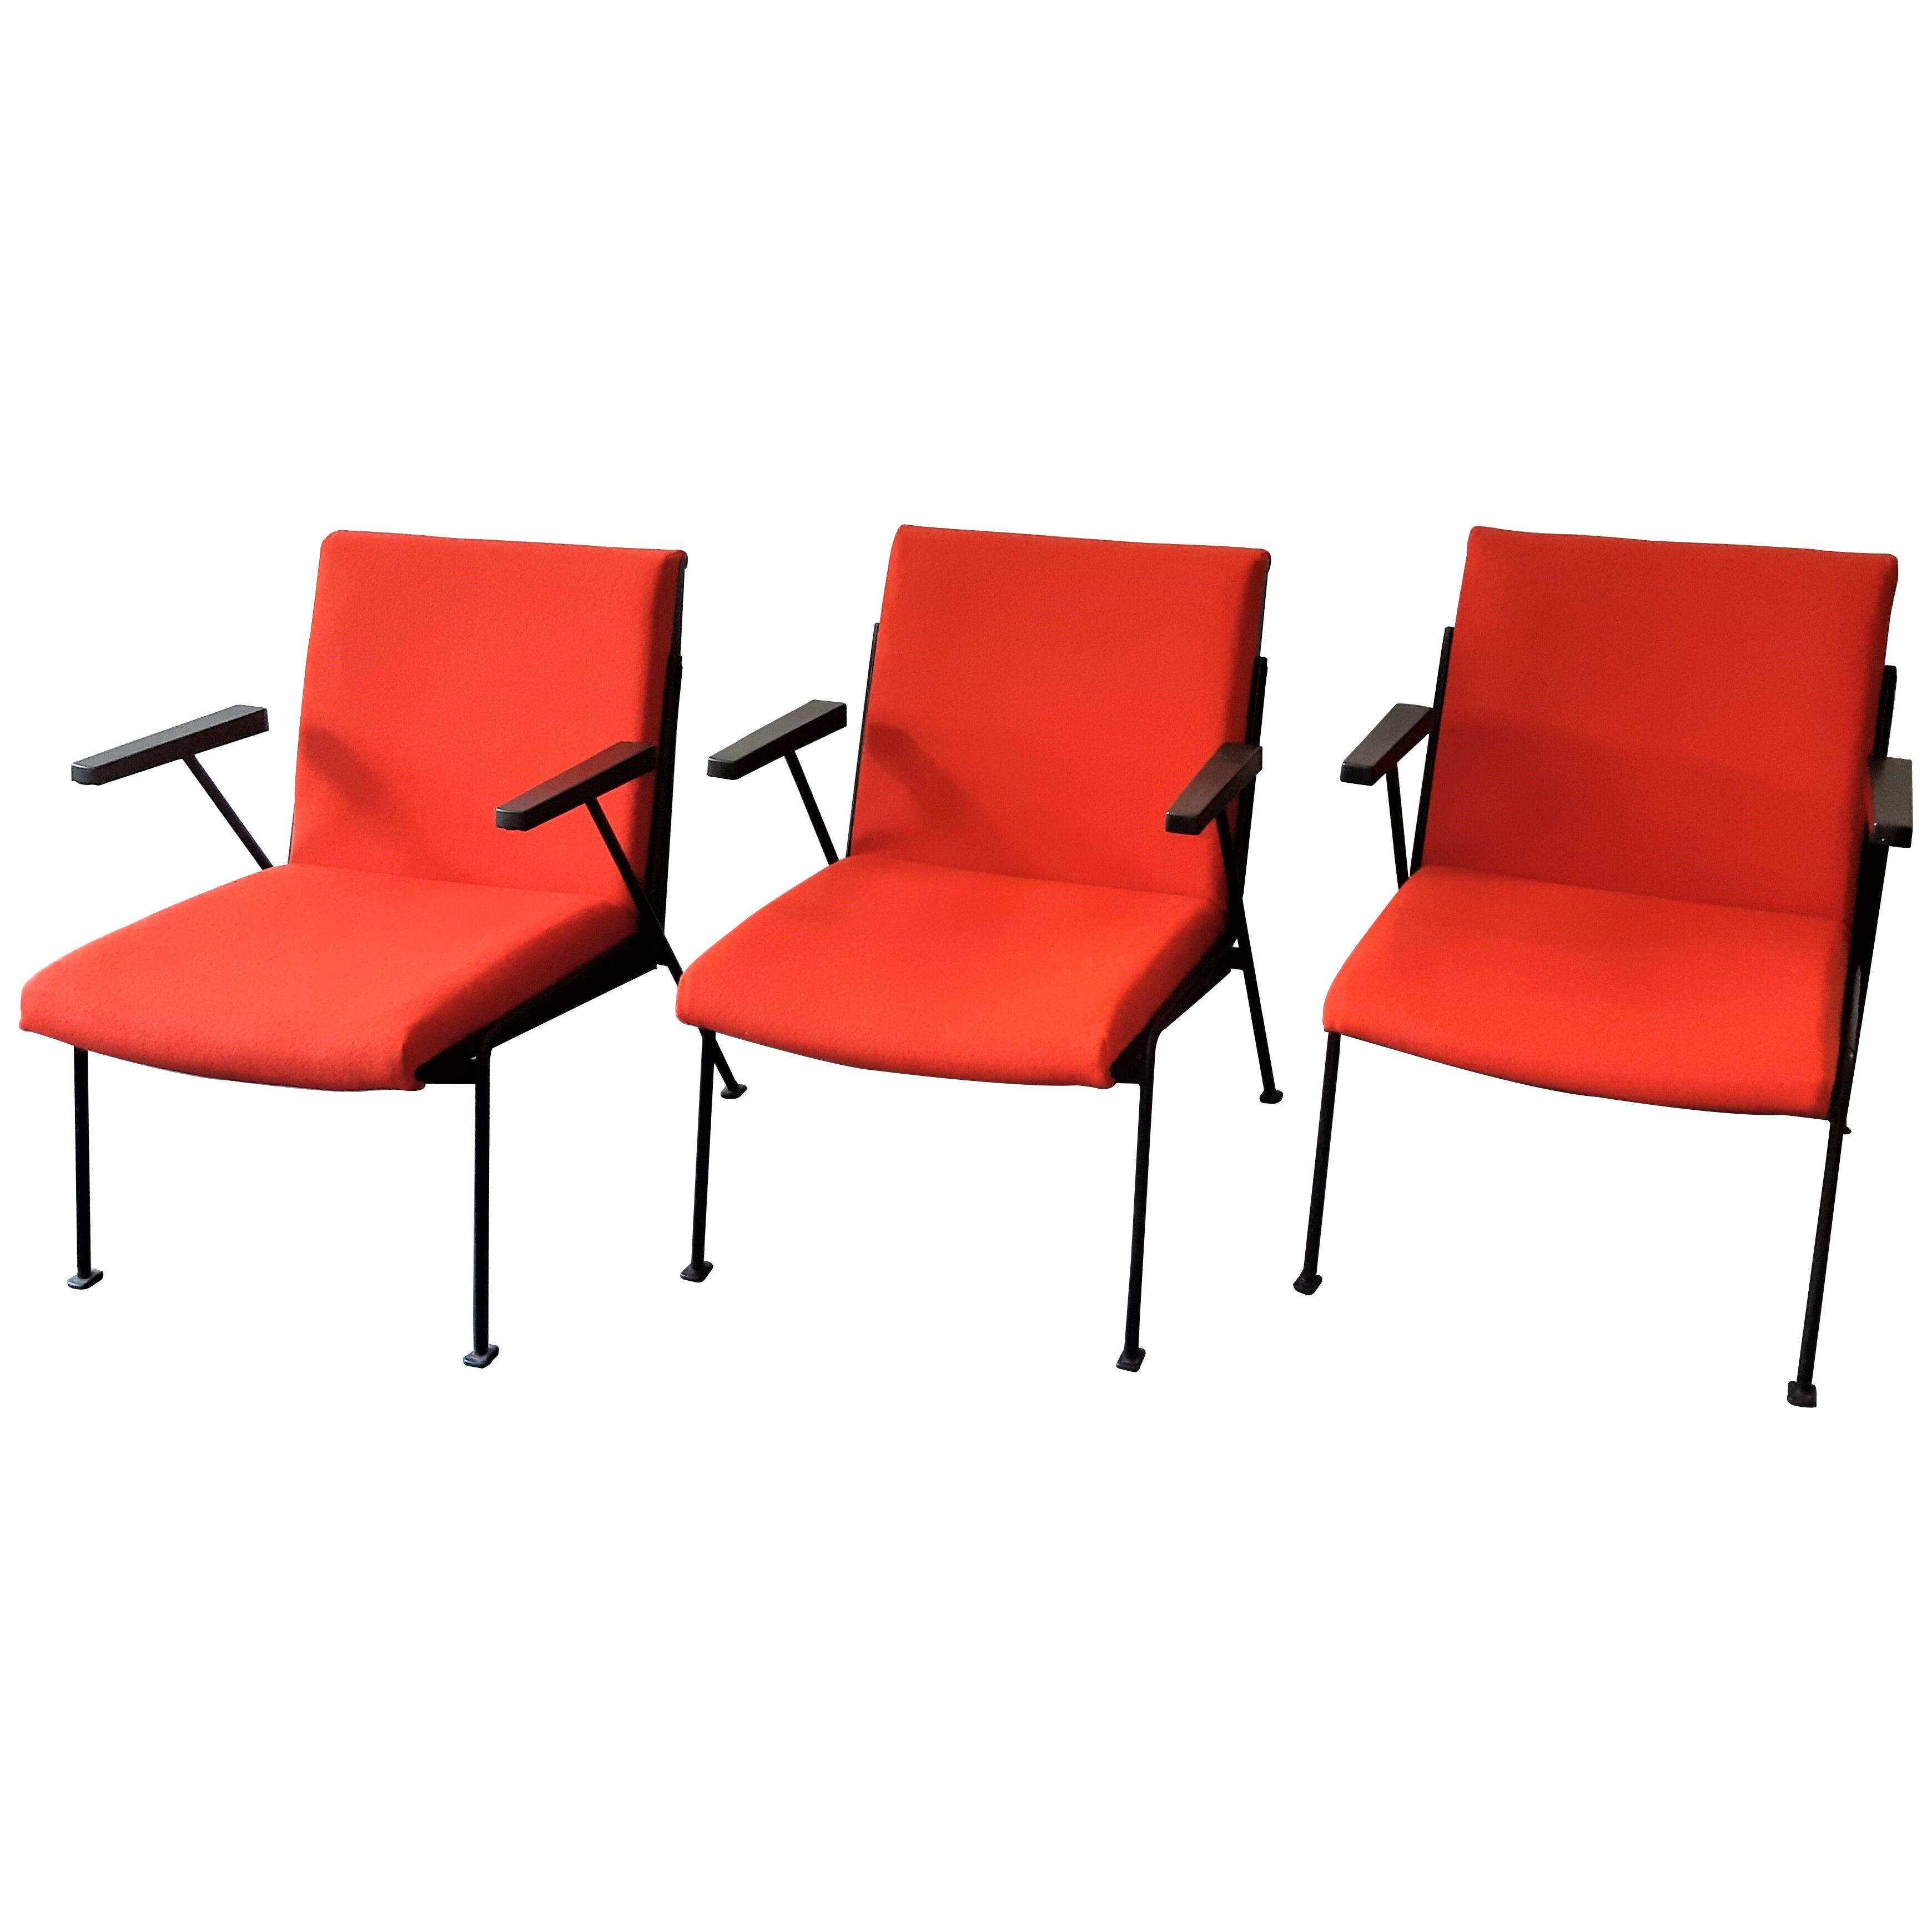 Oase lounge chair with armrests by Rietveld for Ahrend/De Cirkel, 3 available